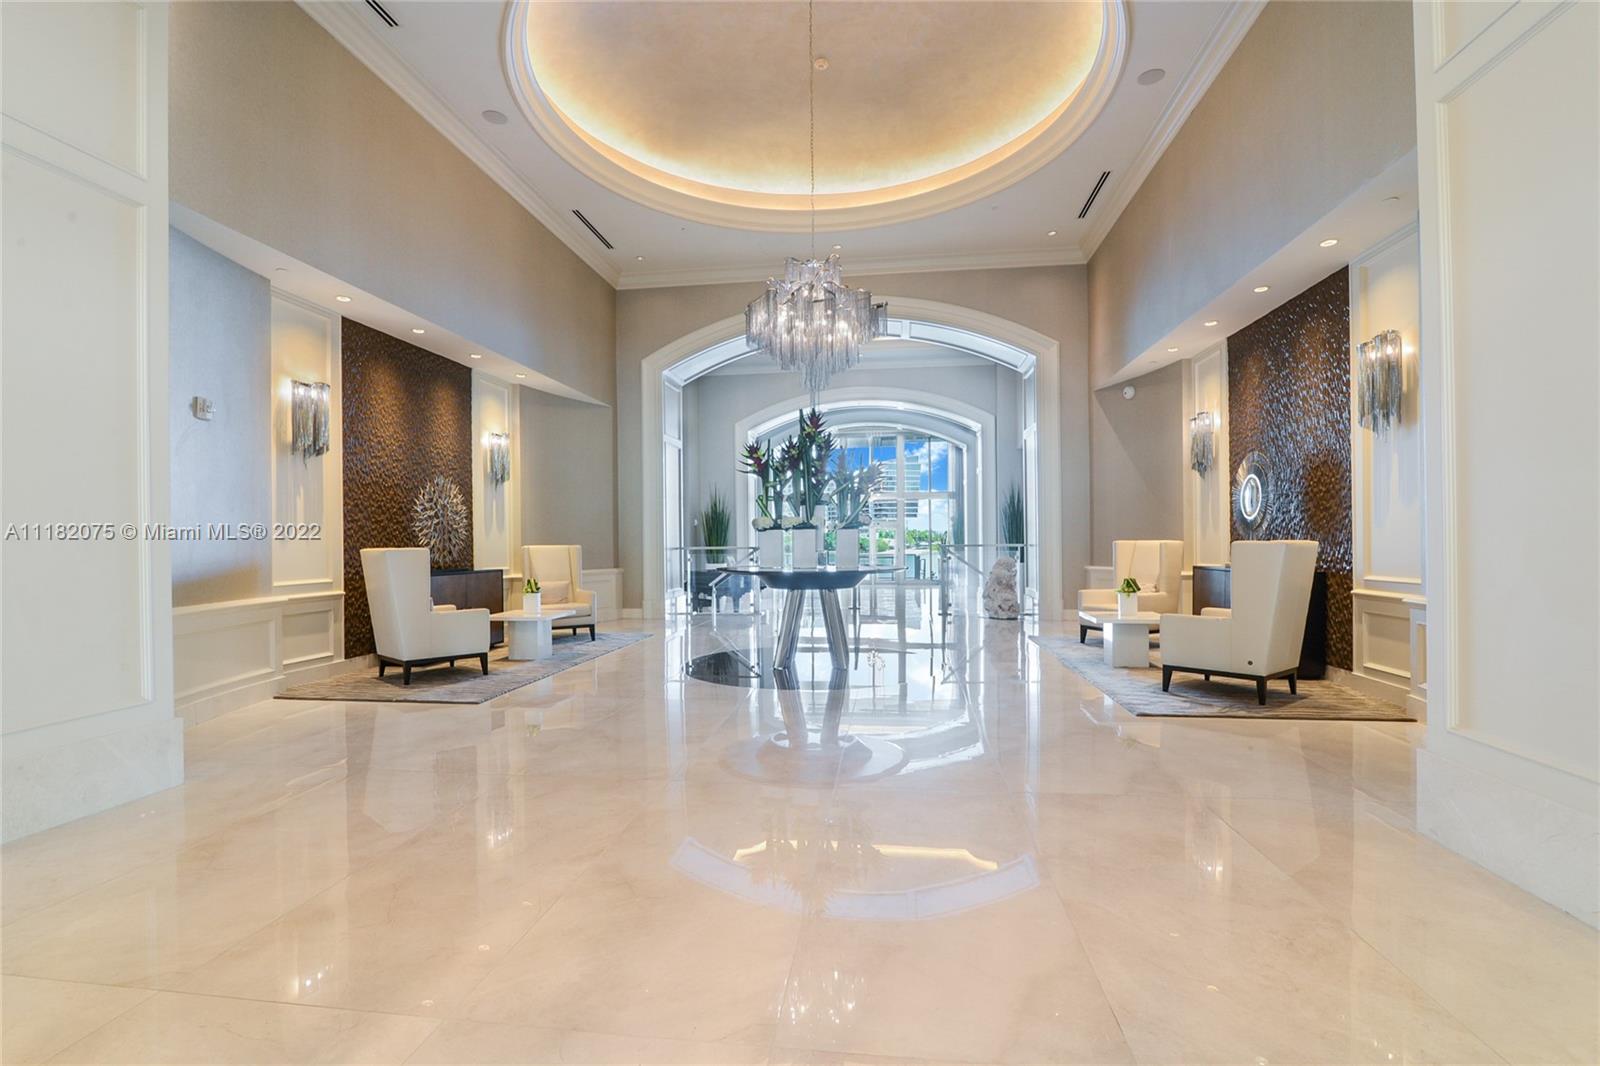 Step off your private elevator and enter the foyer of this magnificent 3 bedroom, 3 bath apartment that has been lovingly cared for and updated by original owner. Enjoy the sunrise over the intracoastal and ocean, and the sunset from the master bedroom balcony. The spacious living area also has a renovated media room with decorator custom built-ins and wall decor. Marble and porcelain tile floors, the gourmet kitchen has been opened with breakfast bar, new appliances and leather granite counters. Guest bath was recently renovated, as well the serene master suite enjoys quiet times with the quiet rock that was installed. The oversized laundry room has access from the condo, with lots of storage. Also included are three owned parking spots, plus additional parking with Valet.